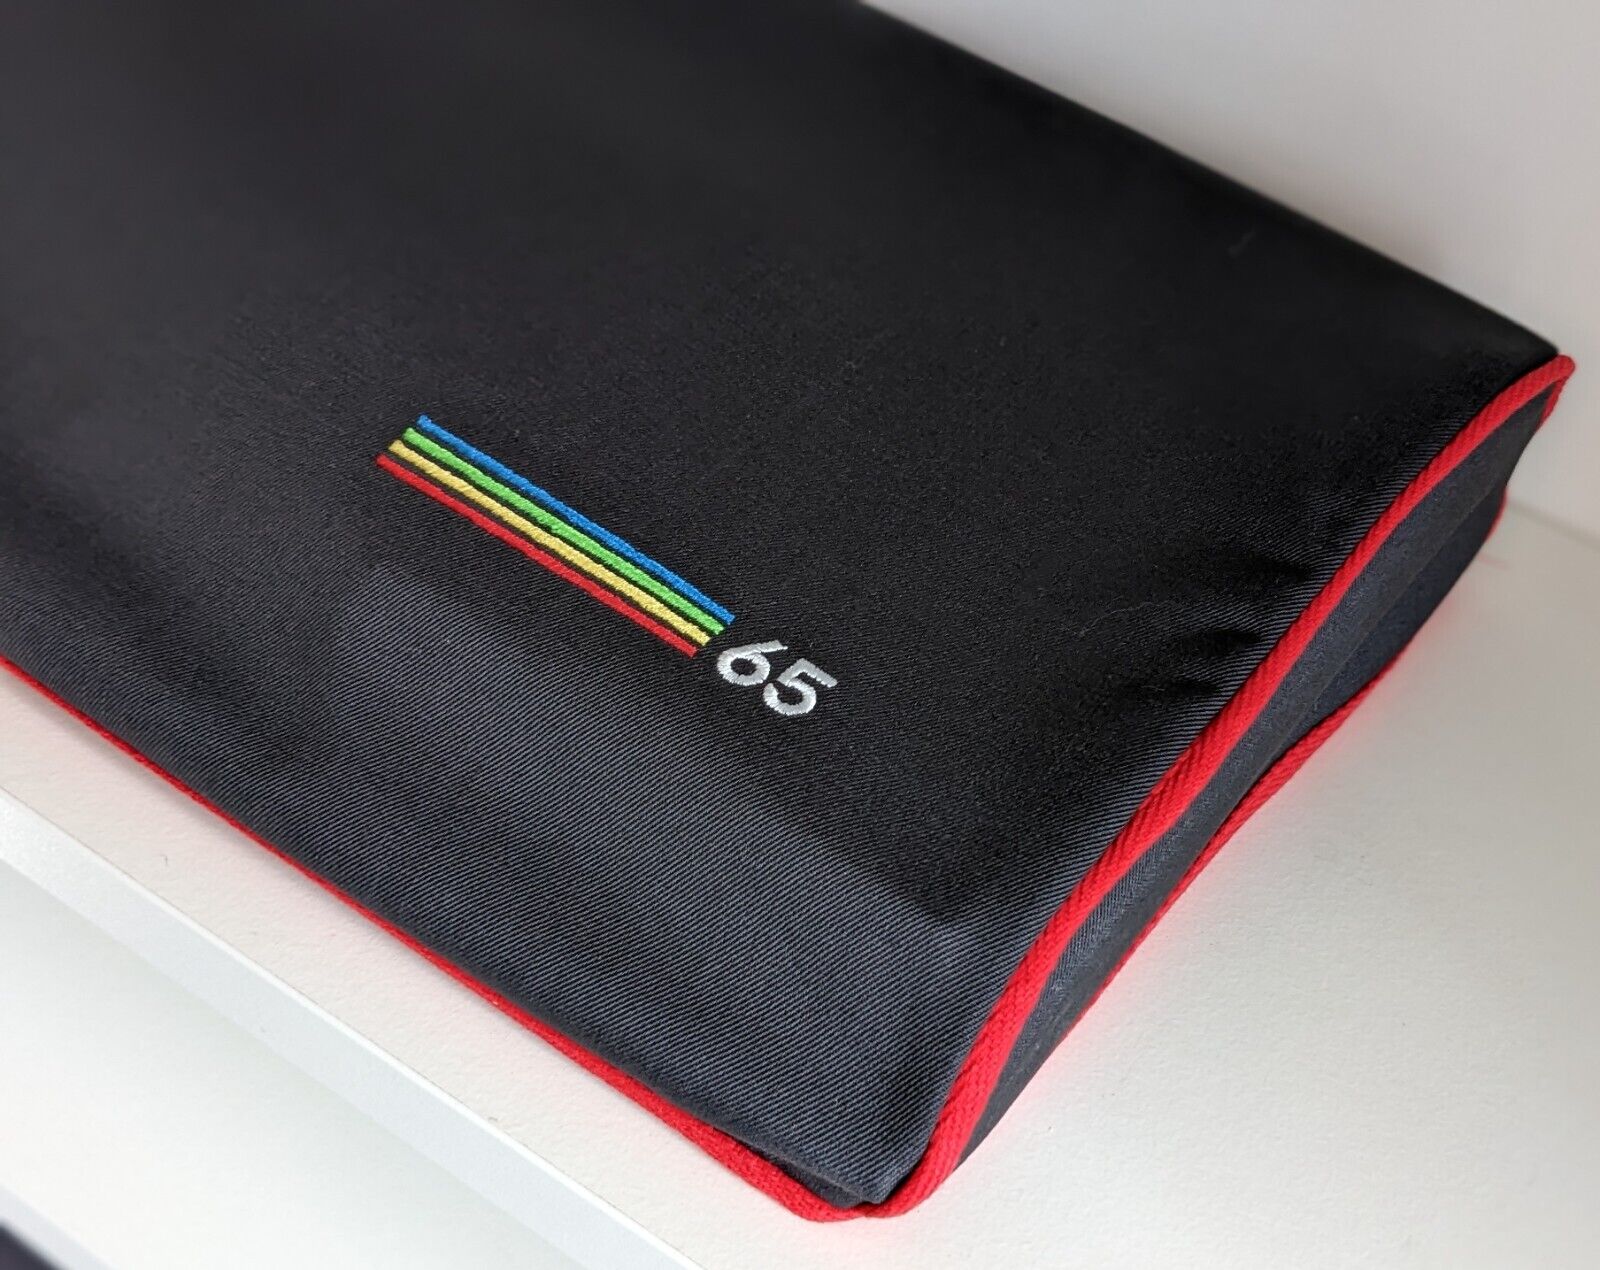 An embroidered dust cover for the MEGA65, by Sew Ready